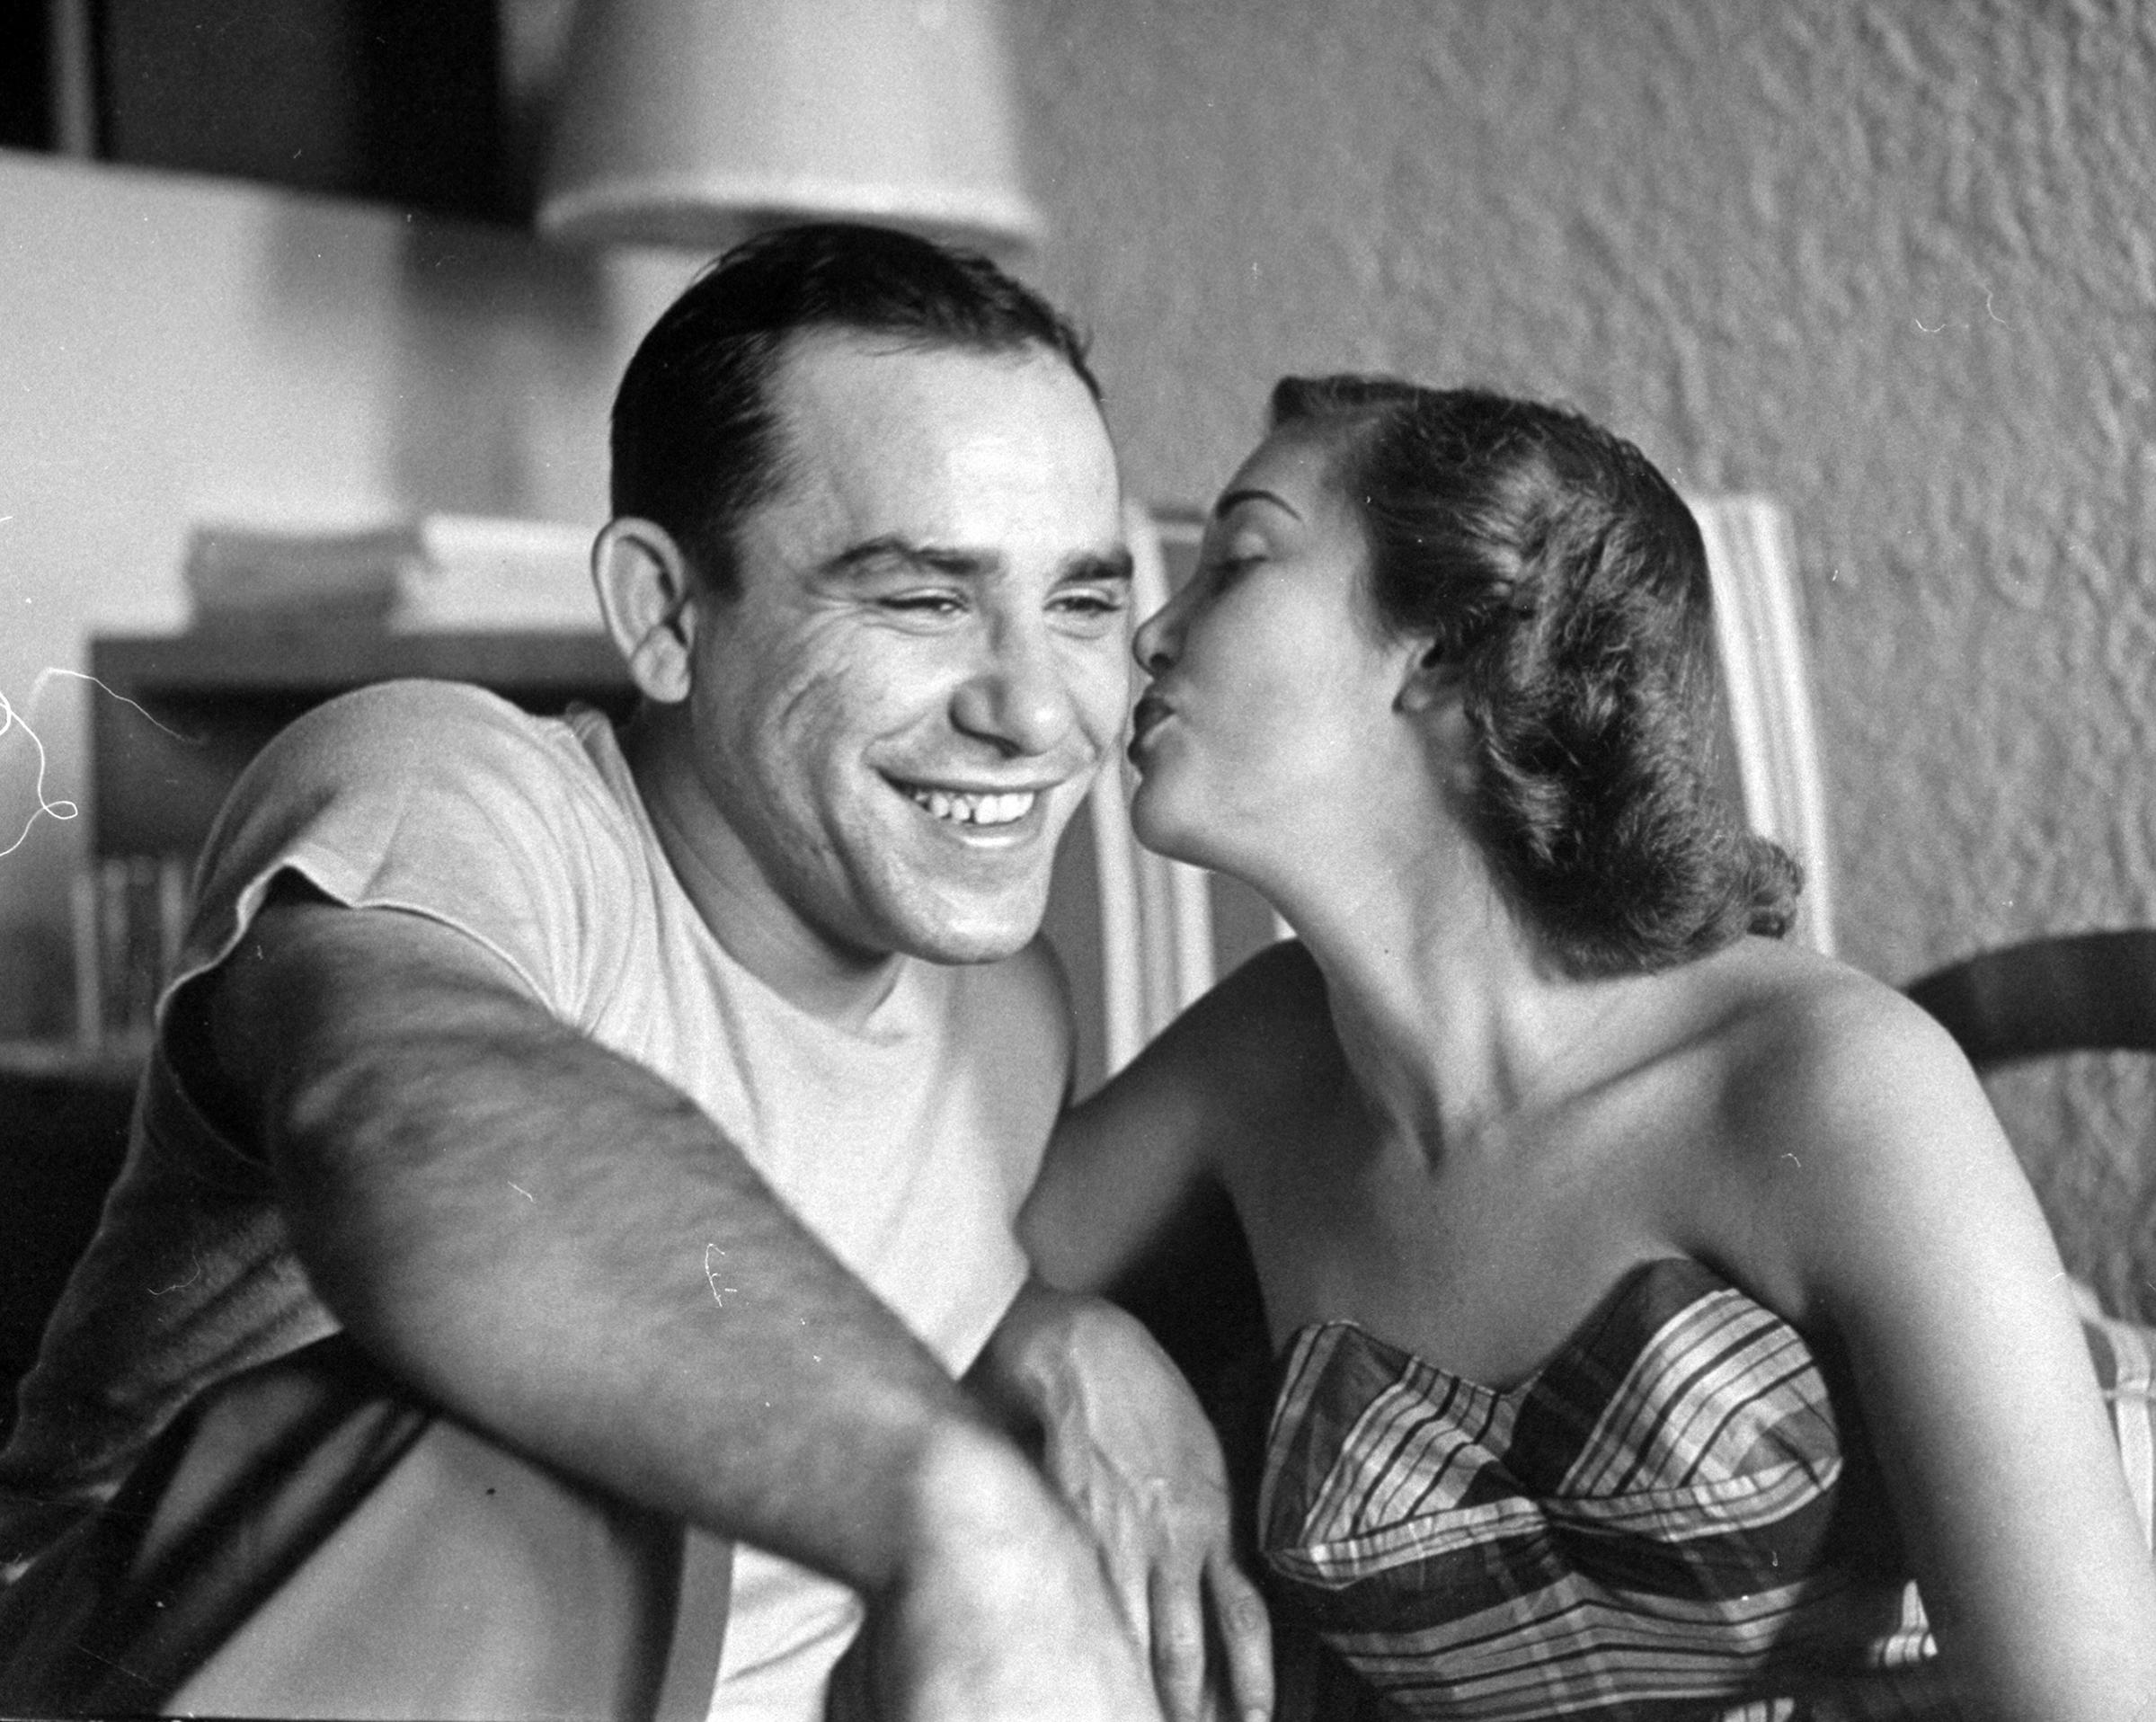 Baseball player Yogi Berra getting kiss from his wife, Carmen, before he leaves for clubhouse. 1949.